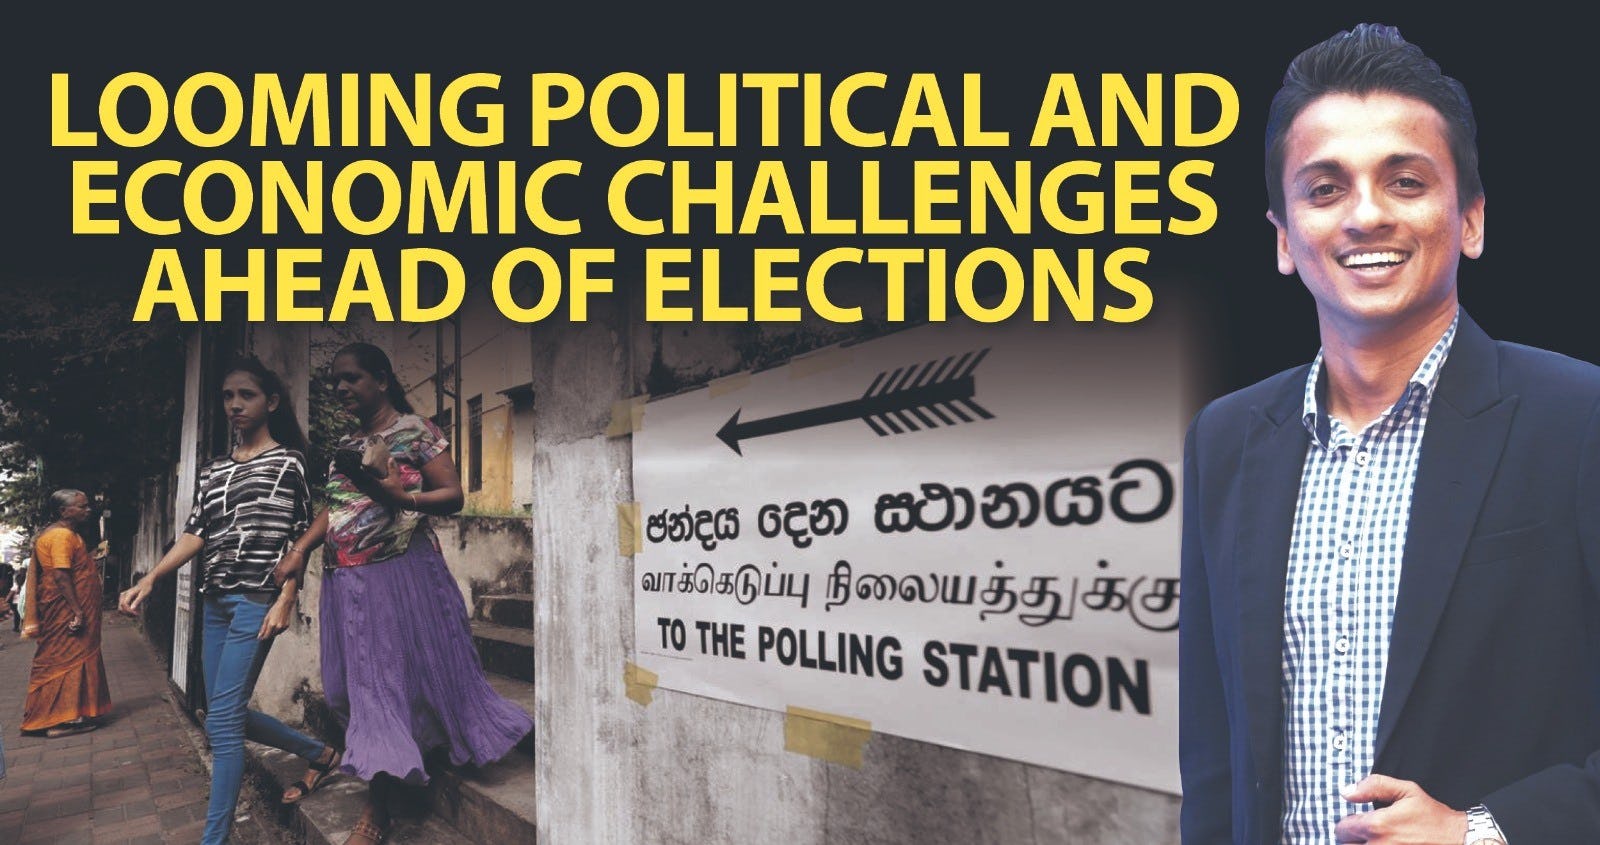 Looming political and economic challenges ahead of elections